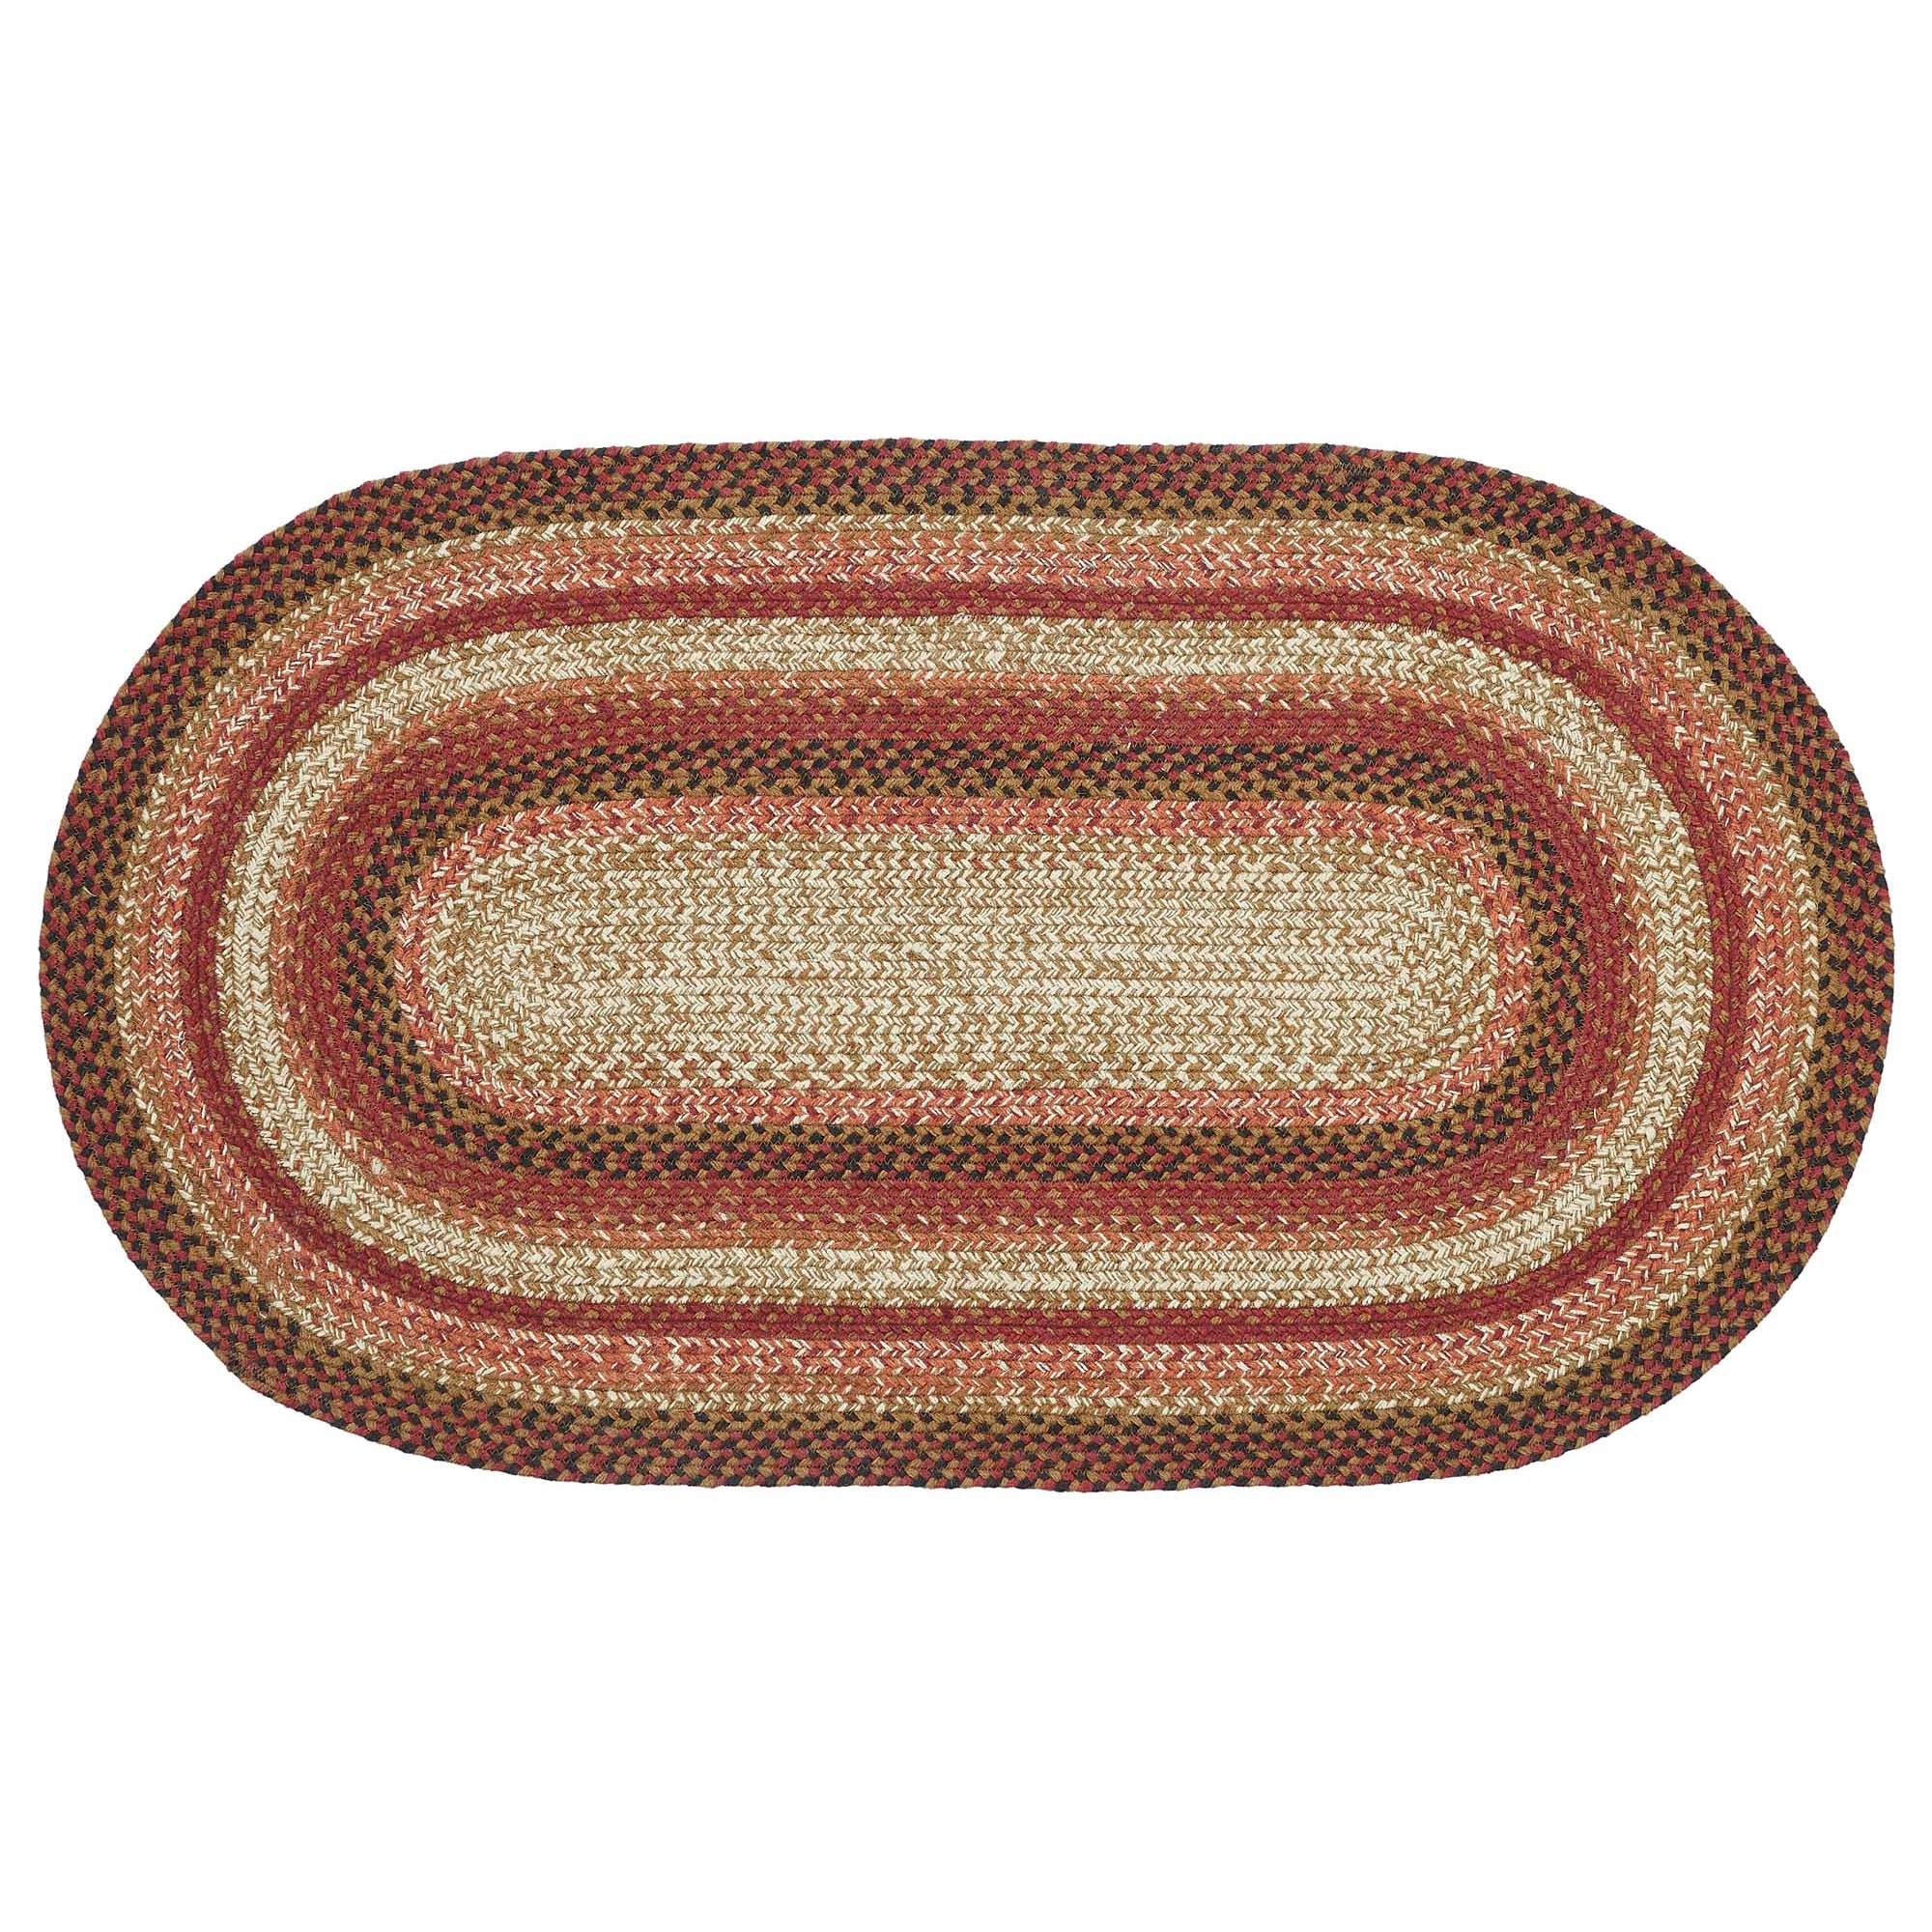 Ginger Spice Jute Rug Oval w/ Pad 27x48 – Beth's Country Primitive